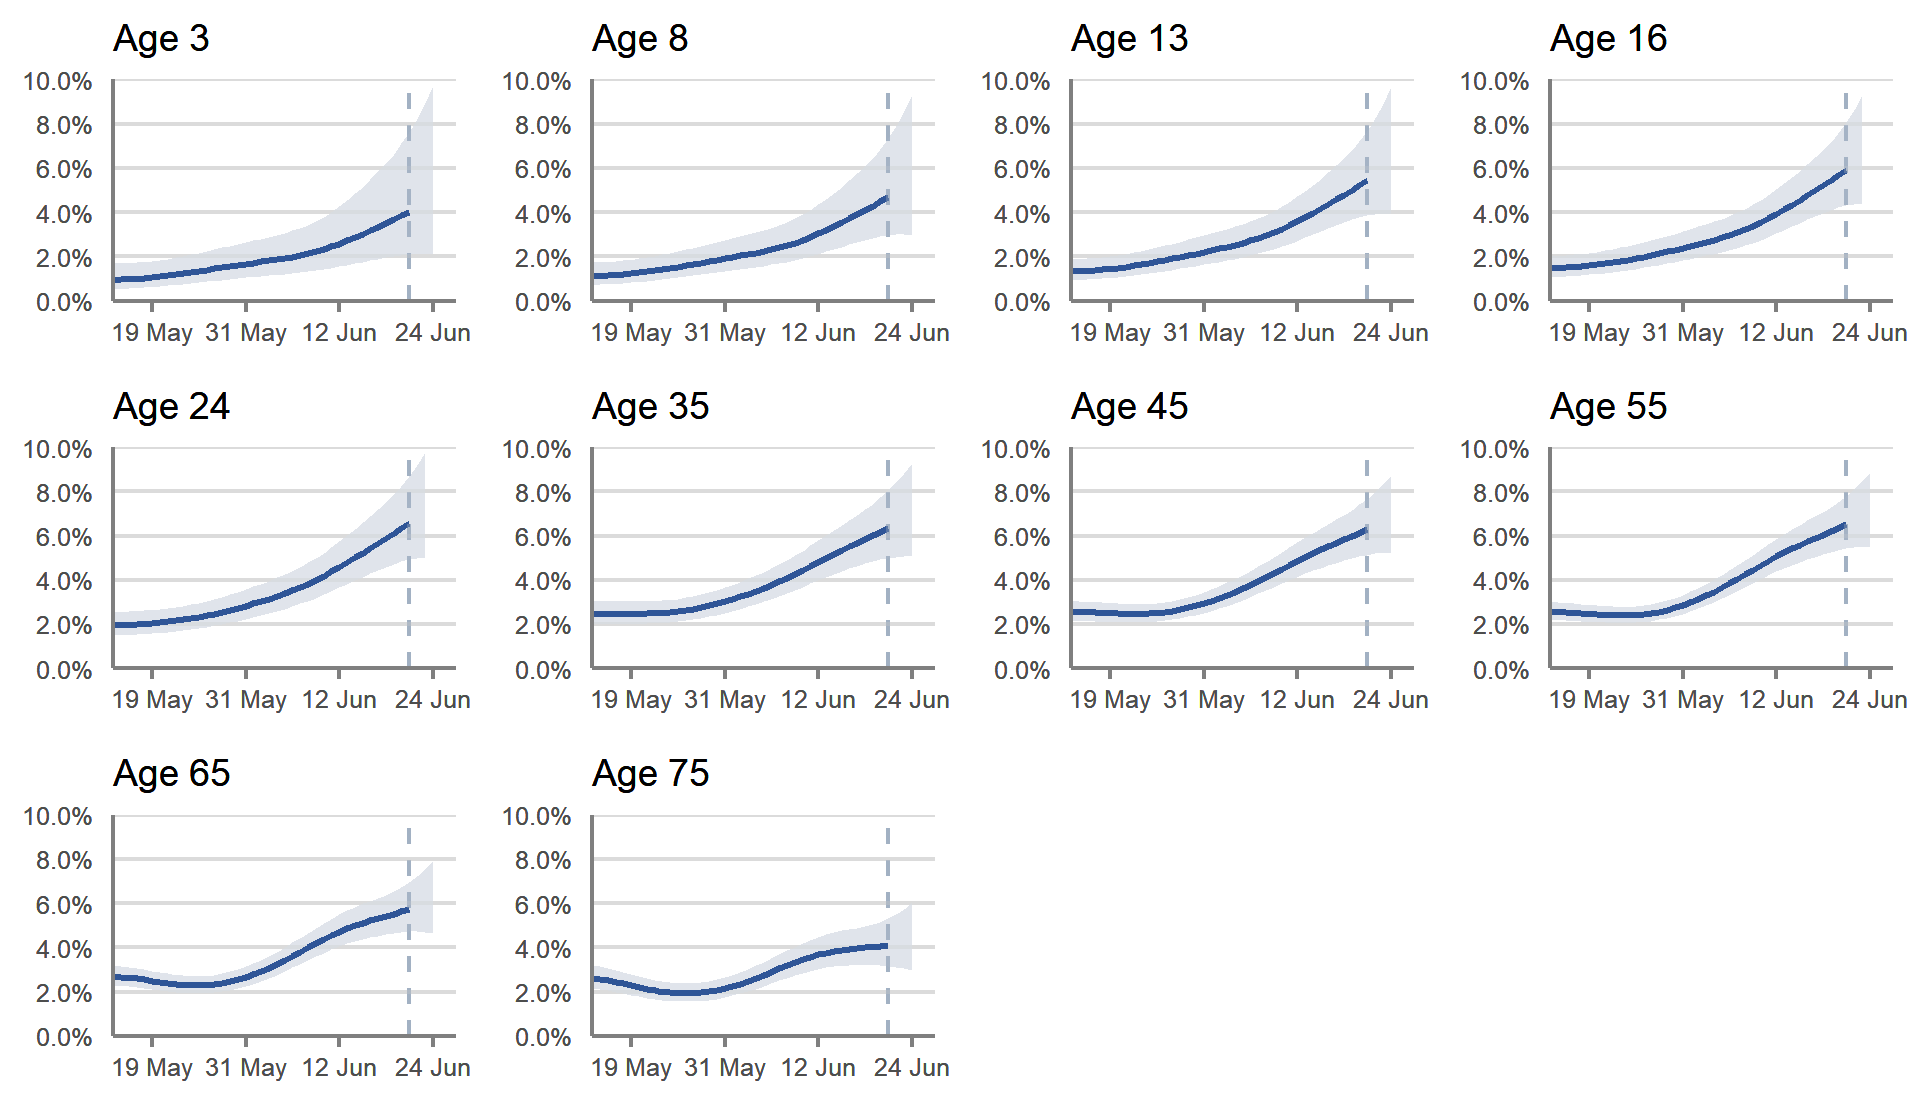 A set of ten line charts showing modelled daily estimates of the percentage of the population in Scotland testing positive for COVID-19 for those of age 3, 8, 13, 16, 24, 35, 45, 55, 65 and 75 years of age, between 14 May and 24 June 2022. Modelled daily estimates are represented by a blue line with 95% credible intervals in pale blue shading. A vertical dashed line near the end of the series indicating greater uncertainty in estimates for the last three reported days. In recent weeks, the estimated percentage of people testing positive for COVID-19 has increased for most age groups in Scotland, but the trend is uncertain for those aged 75 years and over in the most recent week.